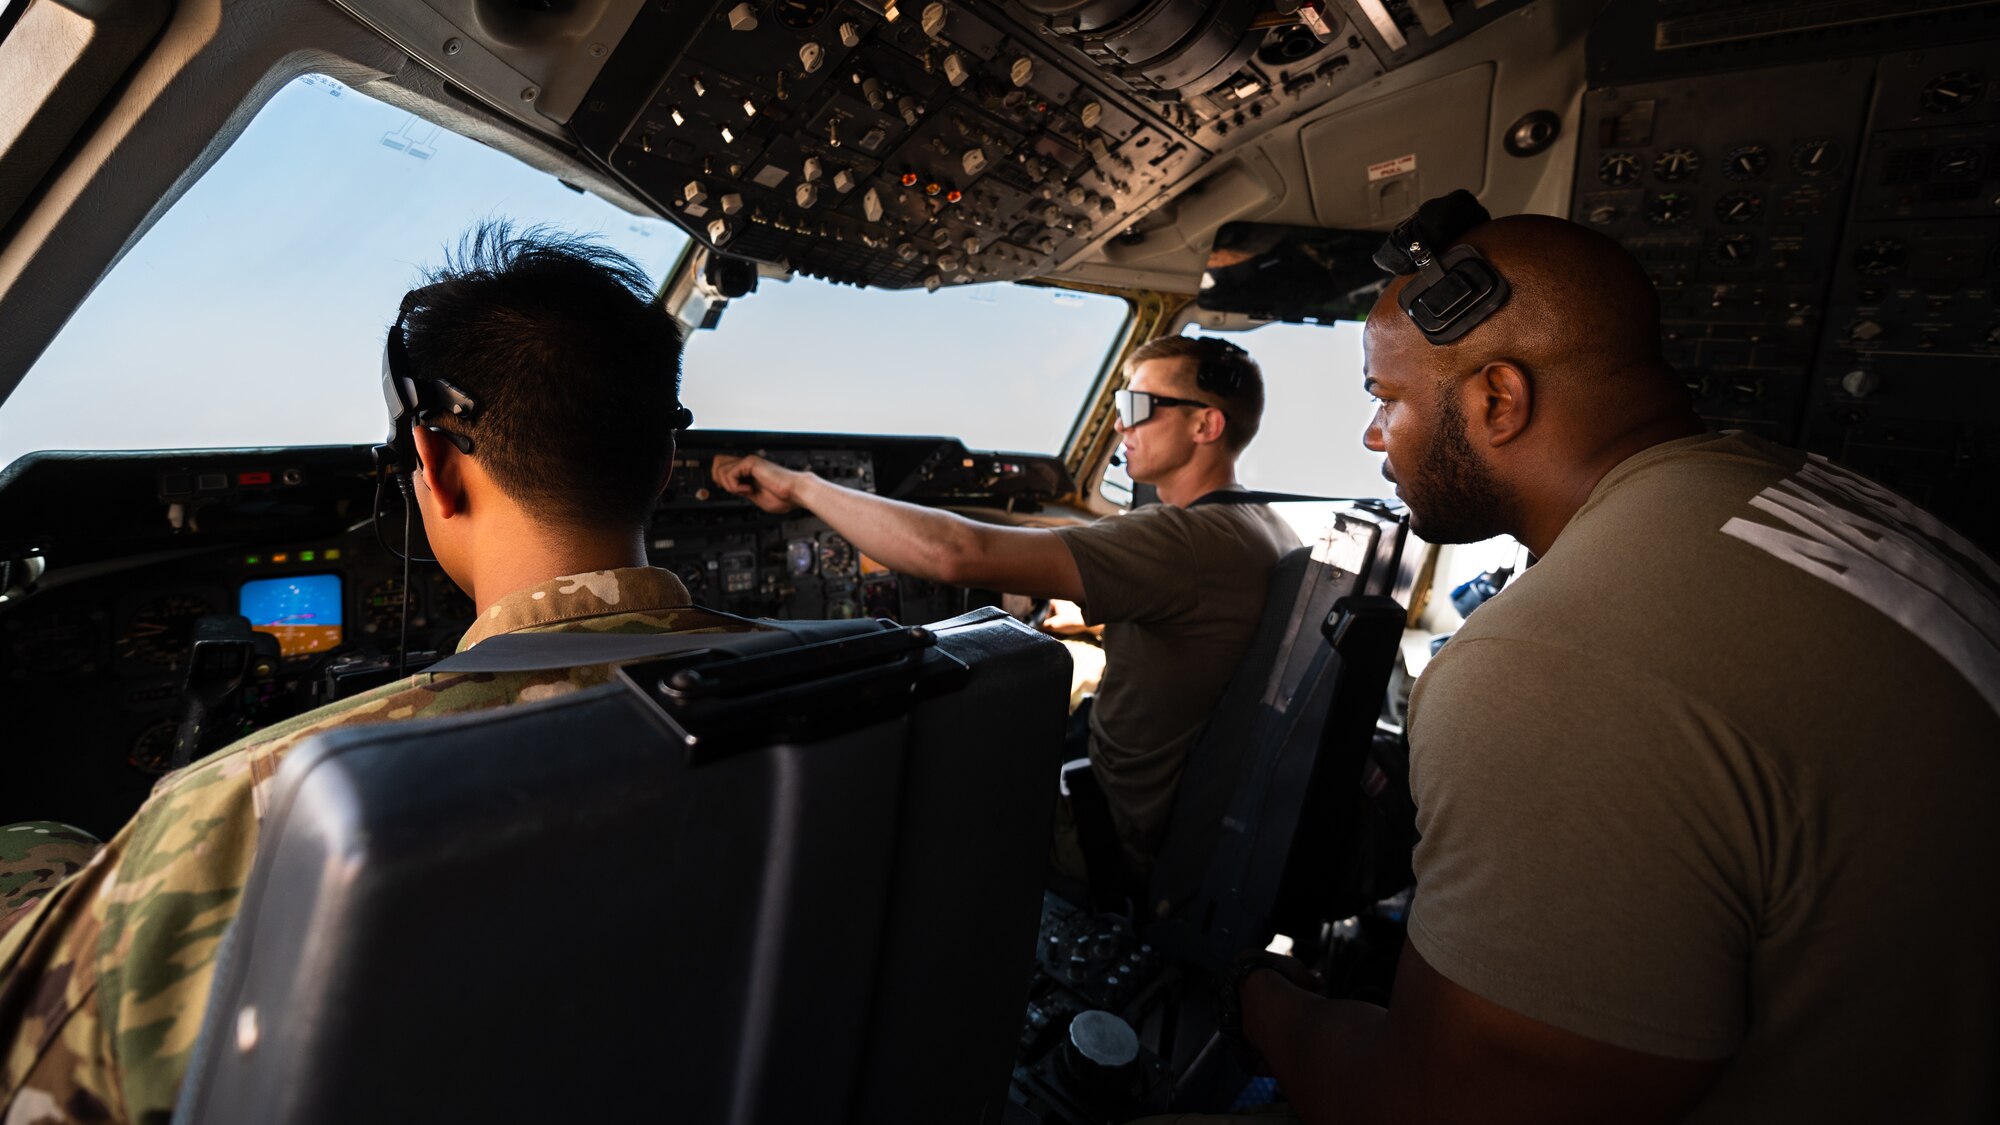 U.S. Air Force Capt. Kevin Cabusora, 908th Expeditionary Air Refueling Squadron aircraft commander, Capt. Gavin Owens 908th EARS instructor pilot, and Tech. Sgt. Justin Lassiter, 908th EARS instructor flight engineer, take off in a KC-10 Extender at Prince Sultan Air Base, Kingdom of Saudi Arabia, April 7, 2022. The crew was composed of Airmen deployed from the 305th Air Mobility Wing, McGuire Air Force Base, New Jersey, to mark the final KC-10 flight by Airmen deployed from McGuire AFB. (U.S. Air Force photo by Senior Airman Jacob B. Wrightsman)